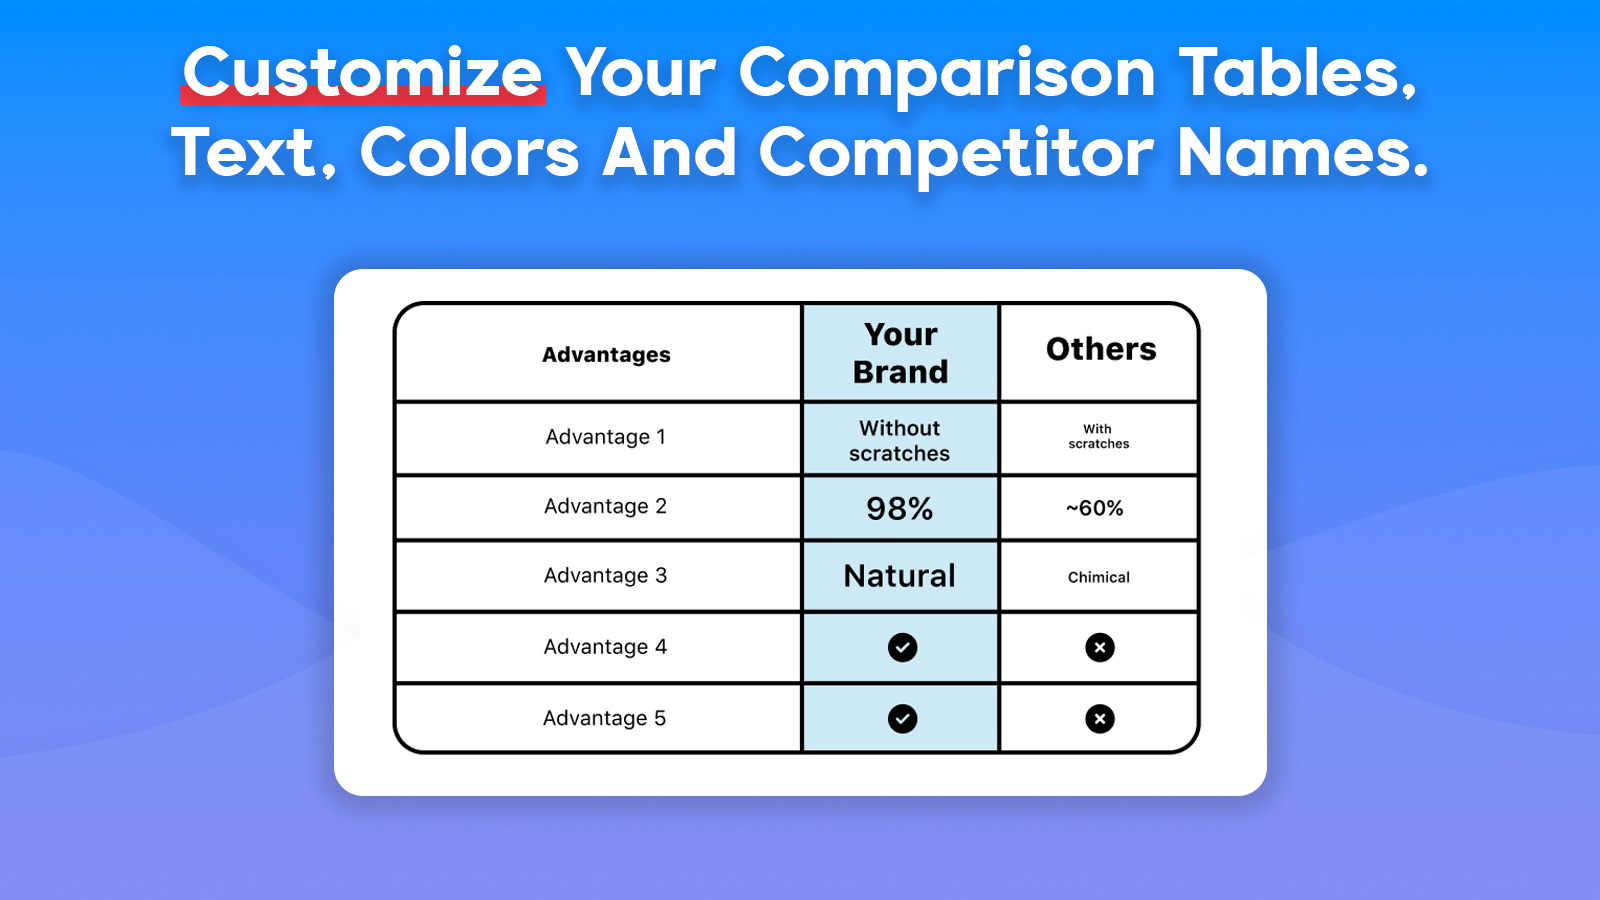 Compare your products with those of your competitors.